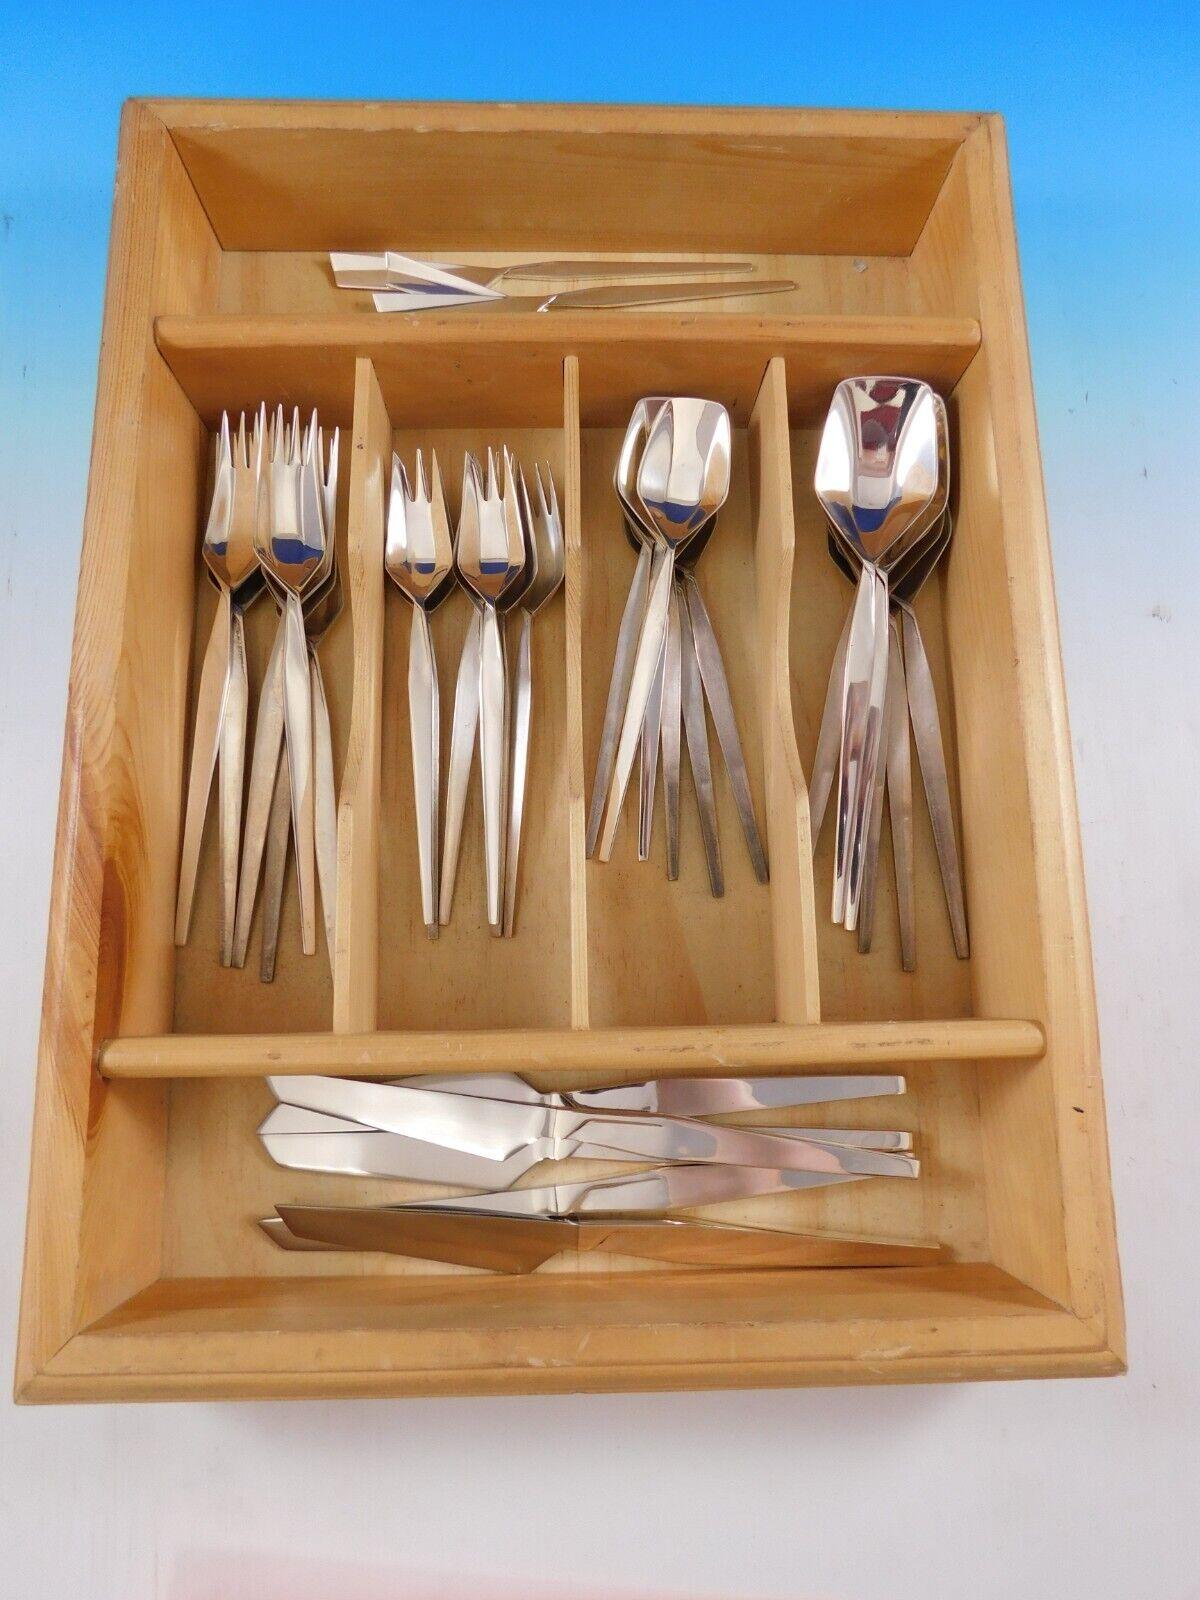 Rare unique Mid-Century Modern Brillante by Celsa, of Mexico, sterling silver Flatware set, 35 pieces. Celsa had a retail store on 57th Street in New York City in the 1950's. The pattern has a fantastic moderne geometric design, elongated handles,